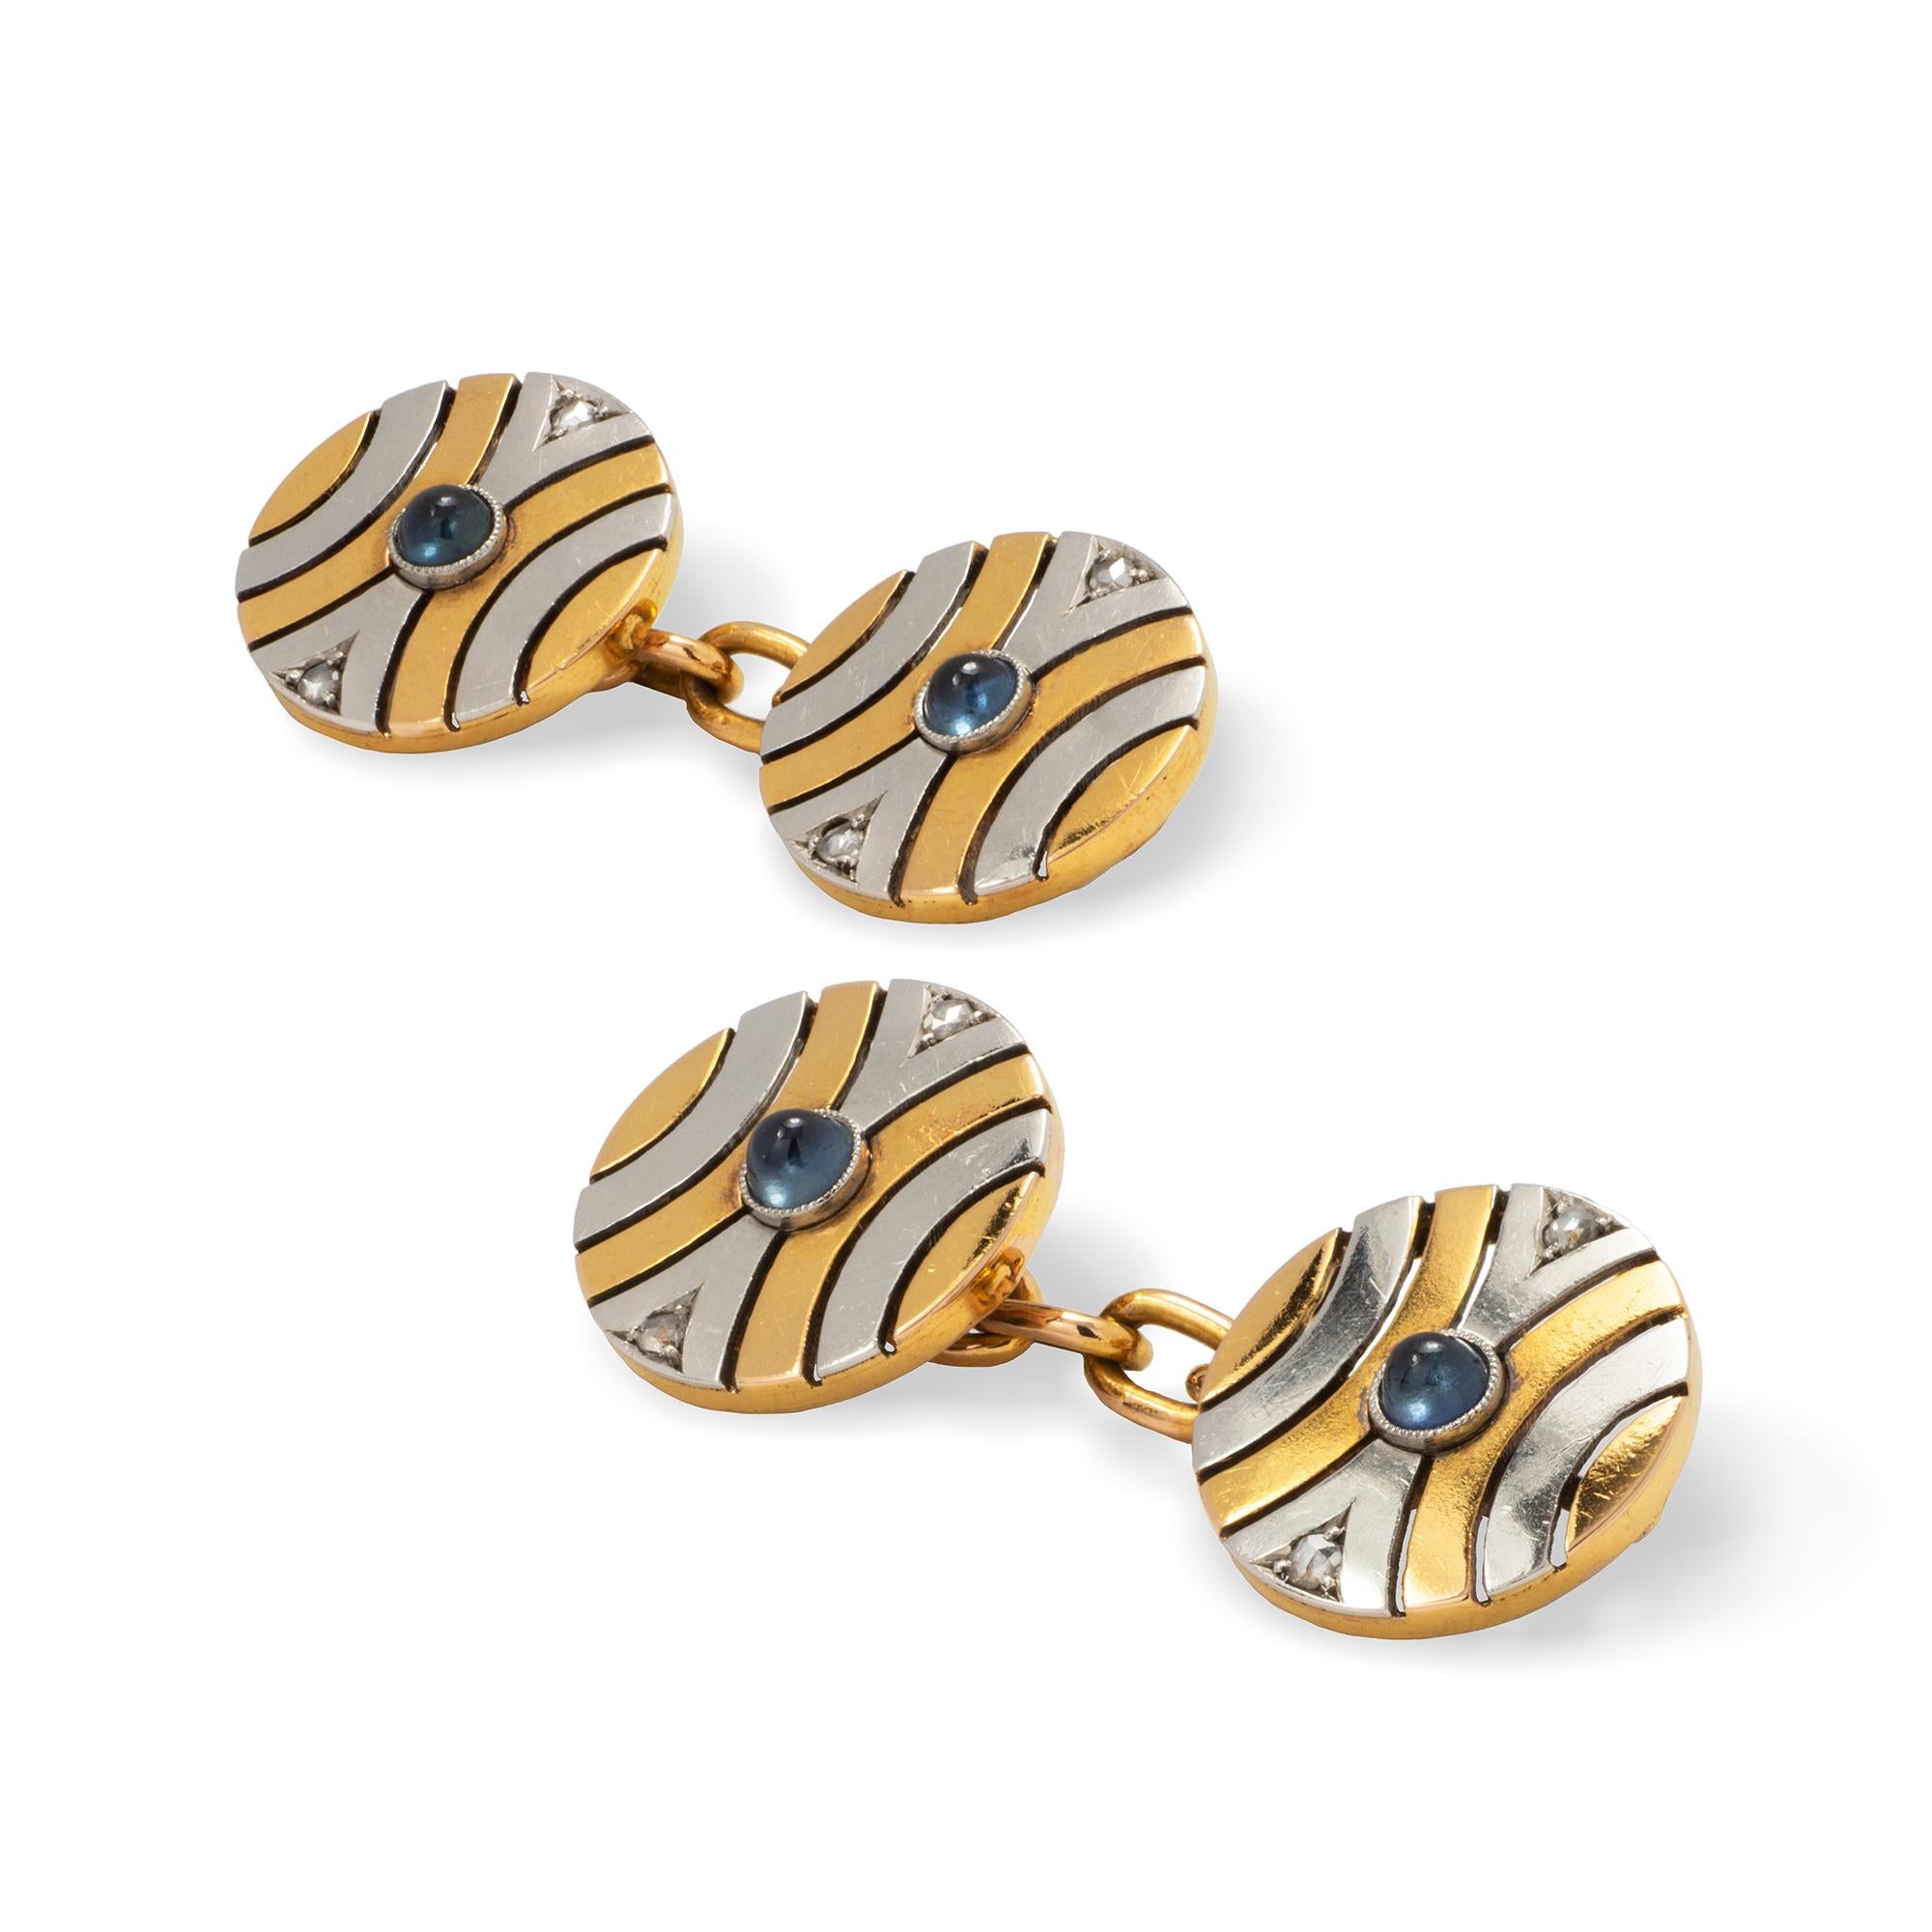 A pair of Art Deco two-colour gold circular cufflinks, each centred with a cabochon sapphire and with two rose cut diamonds, formed as open-work waisted curved sections, circa 1930, measuring approximately 1.3 cm  in diameter, gross weight 7.7